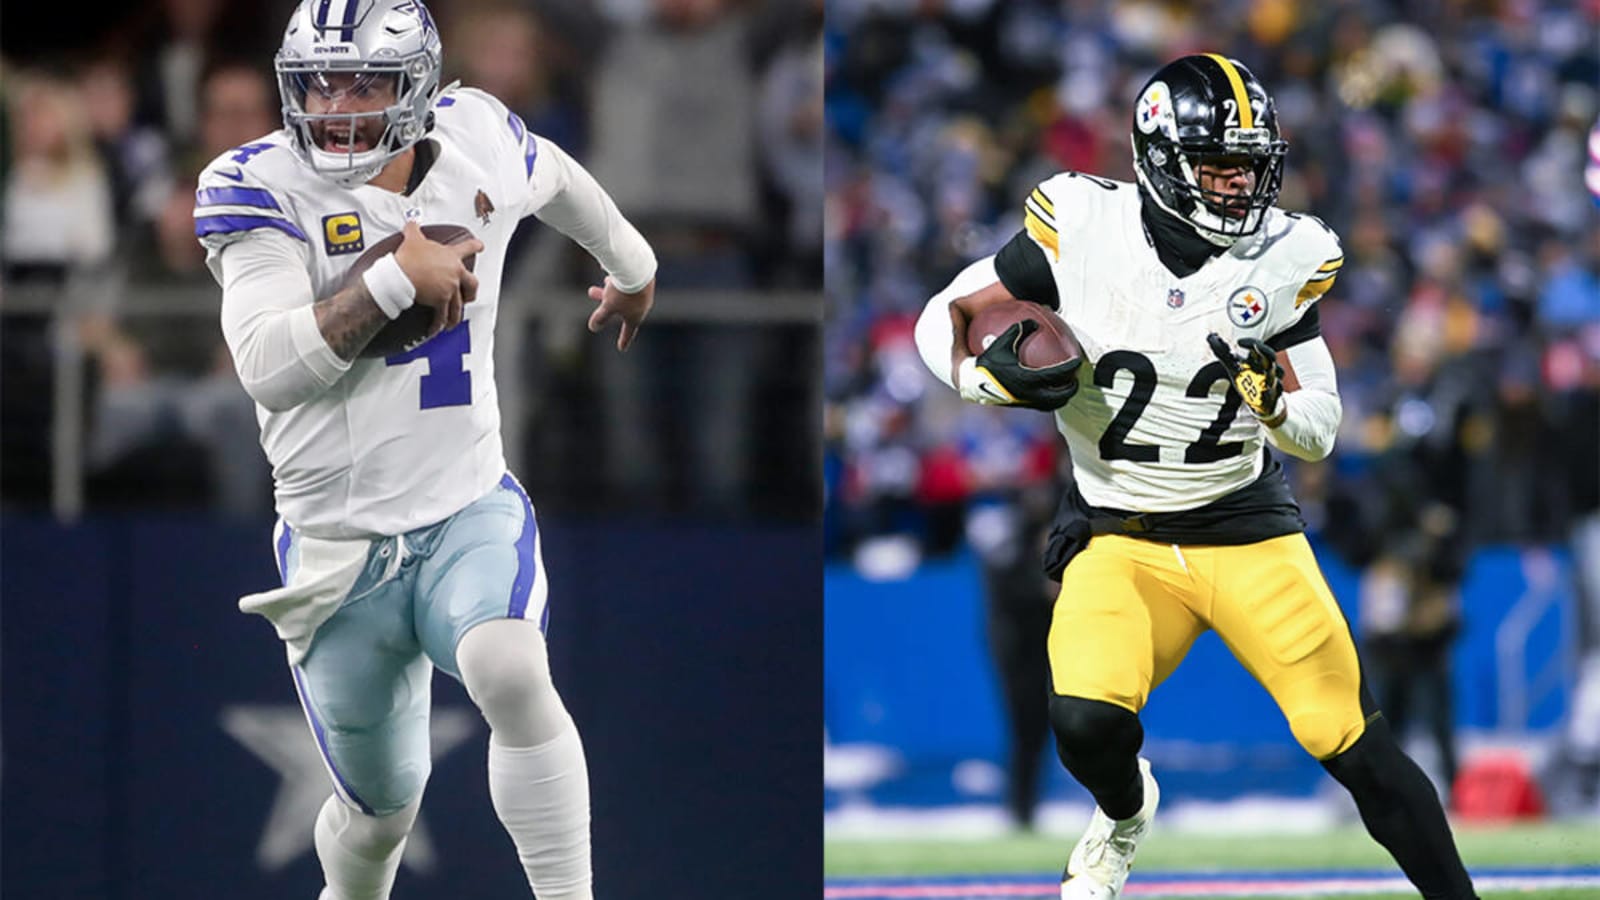 Cowboys' Prescott Named 'Most Hated' Player by Steelers' Harris